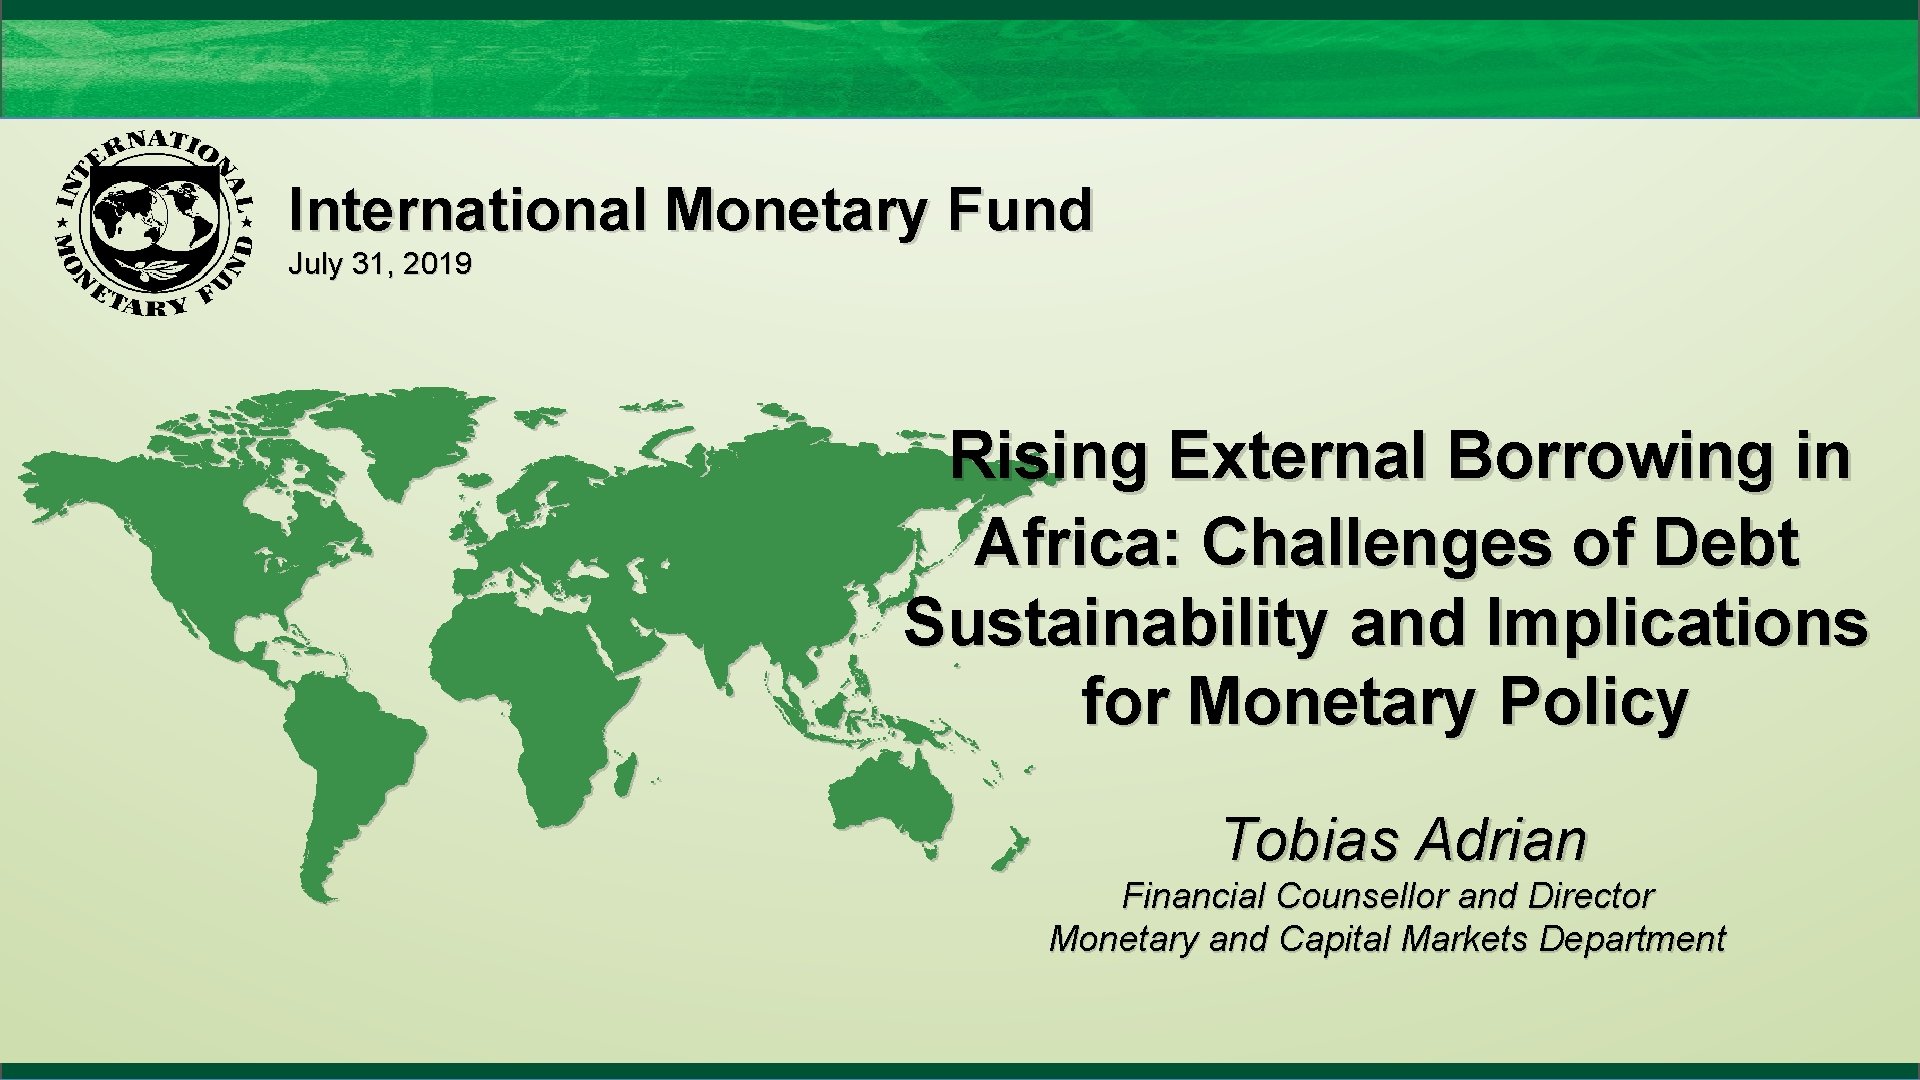 International Monetary Fund July 31, 2019 Rising External Borrowing in Africa: Challenges of Debt